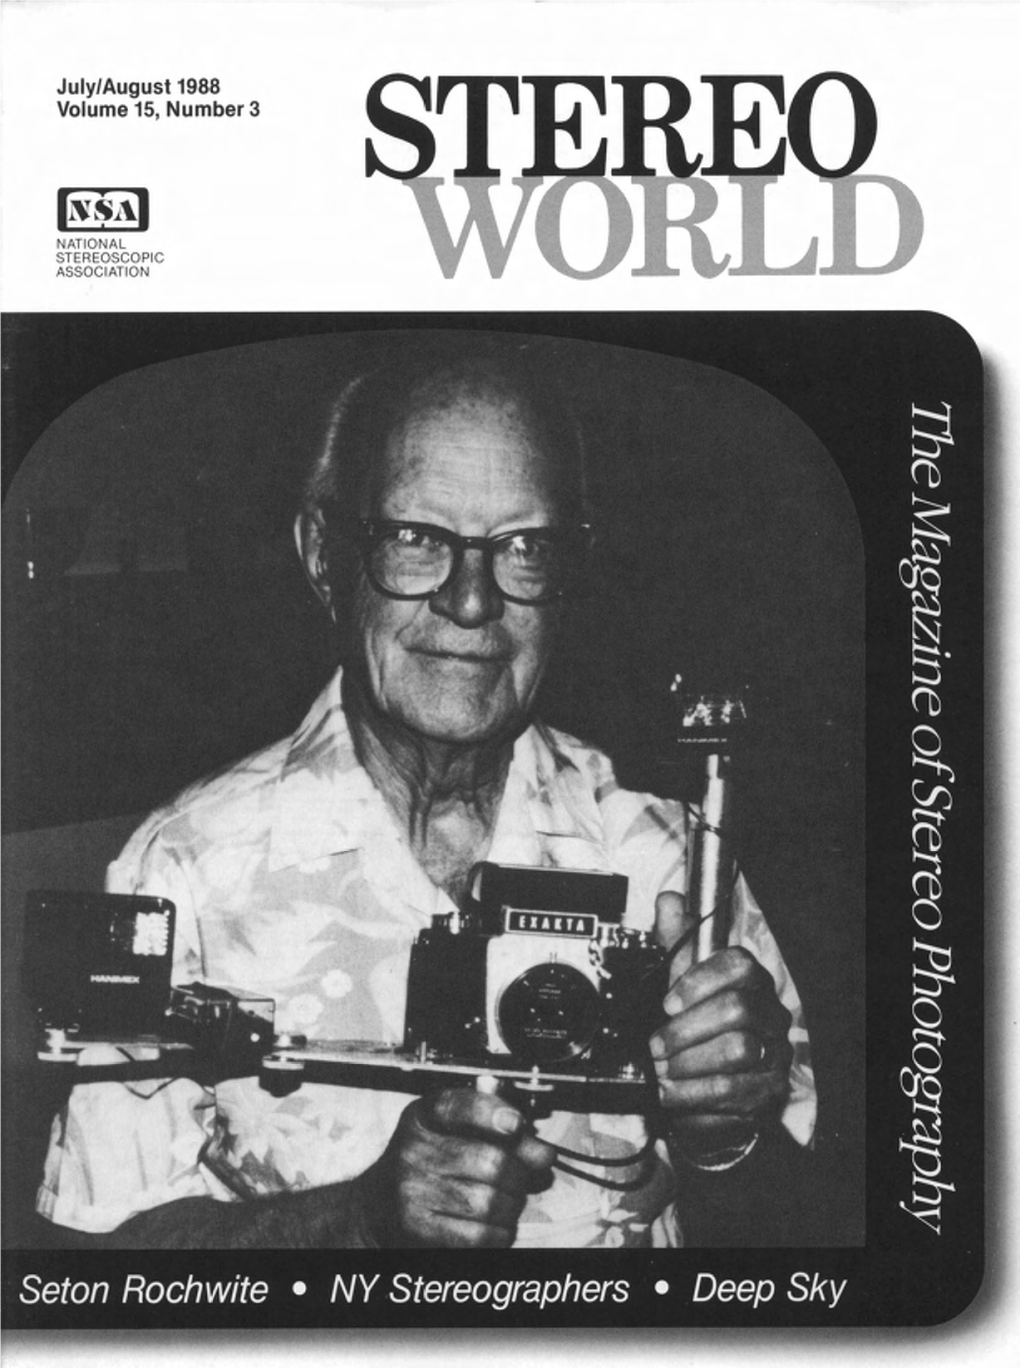 Julylaugust 1988 Volume 15, Number 3 STE-Re0ab* 7 NATIONAL STEREOSCOPIC ASSOCIATION M'r* NEW CENTER for Phmo HISTORY